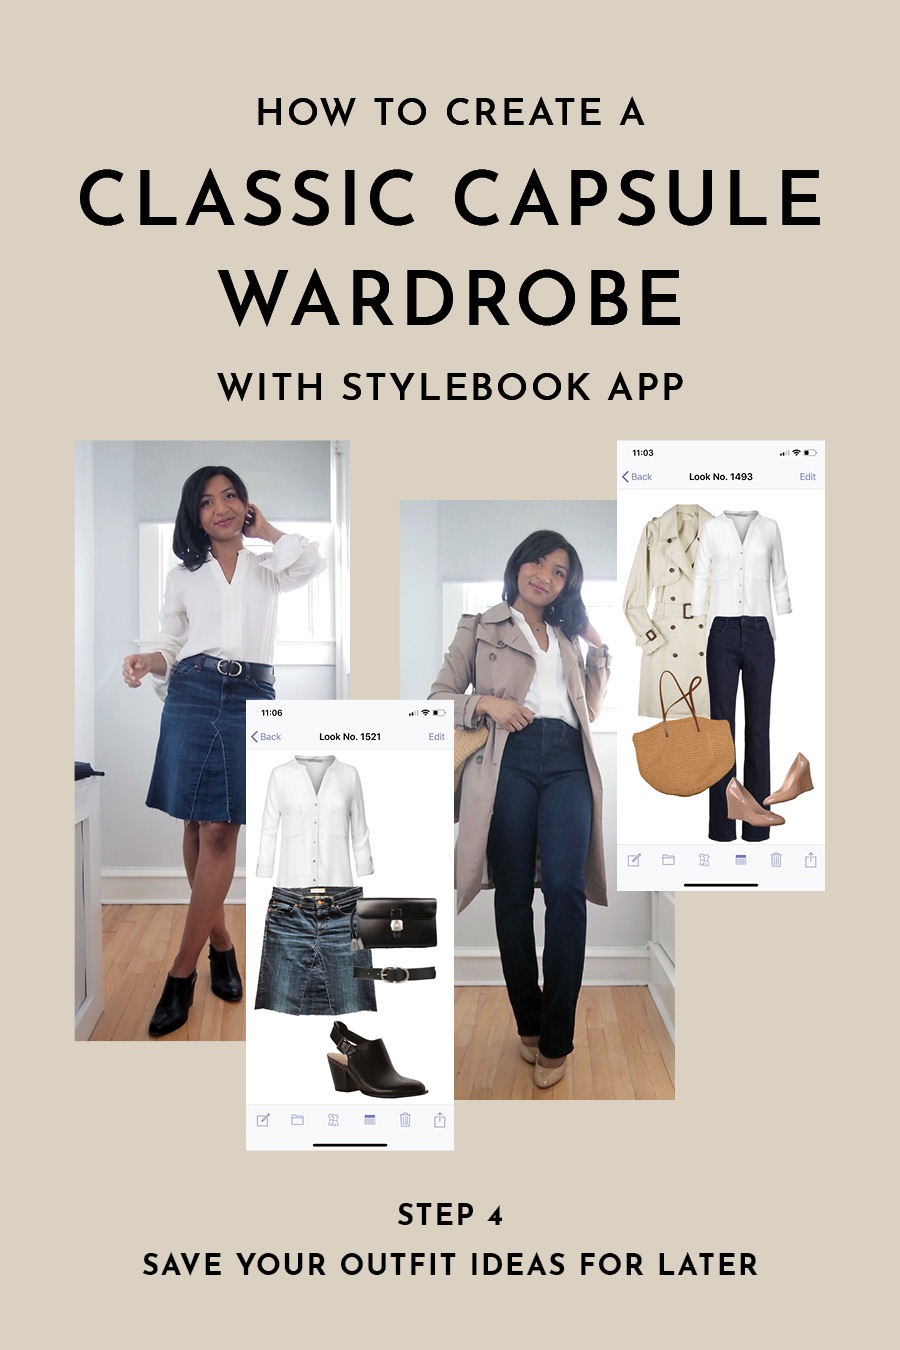 Stylebook Closet App: Building a Classic Capsule with Stylebook